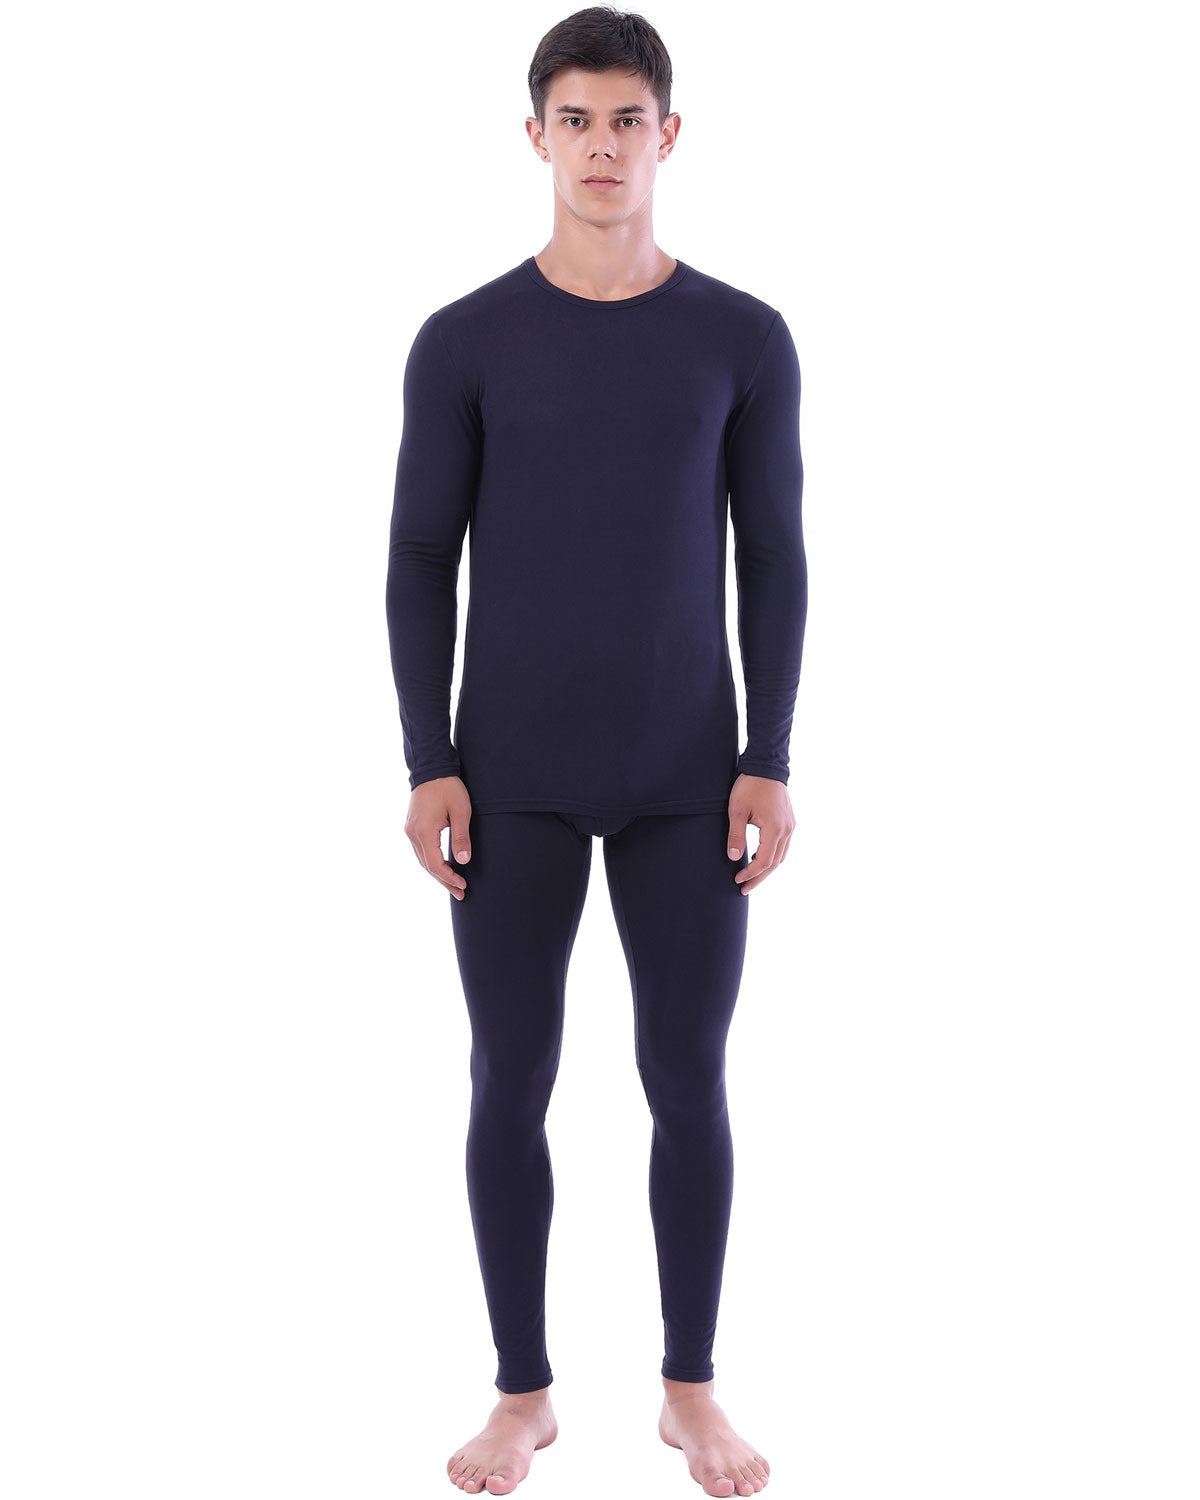 Thermal Underwear for Men Thin Fleece Lined Thermals Men's Base